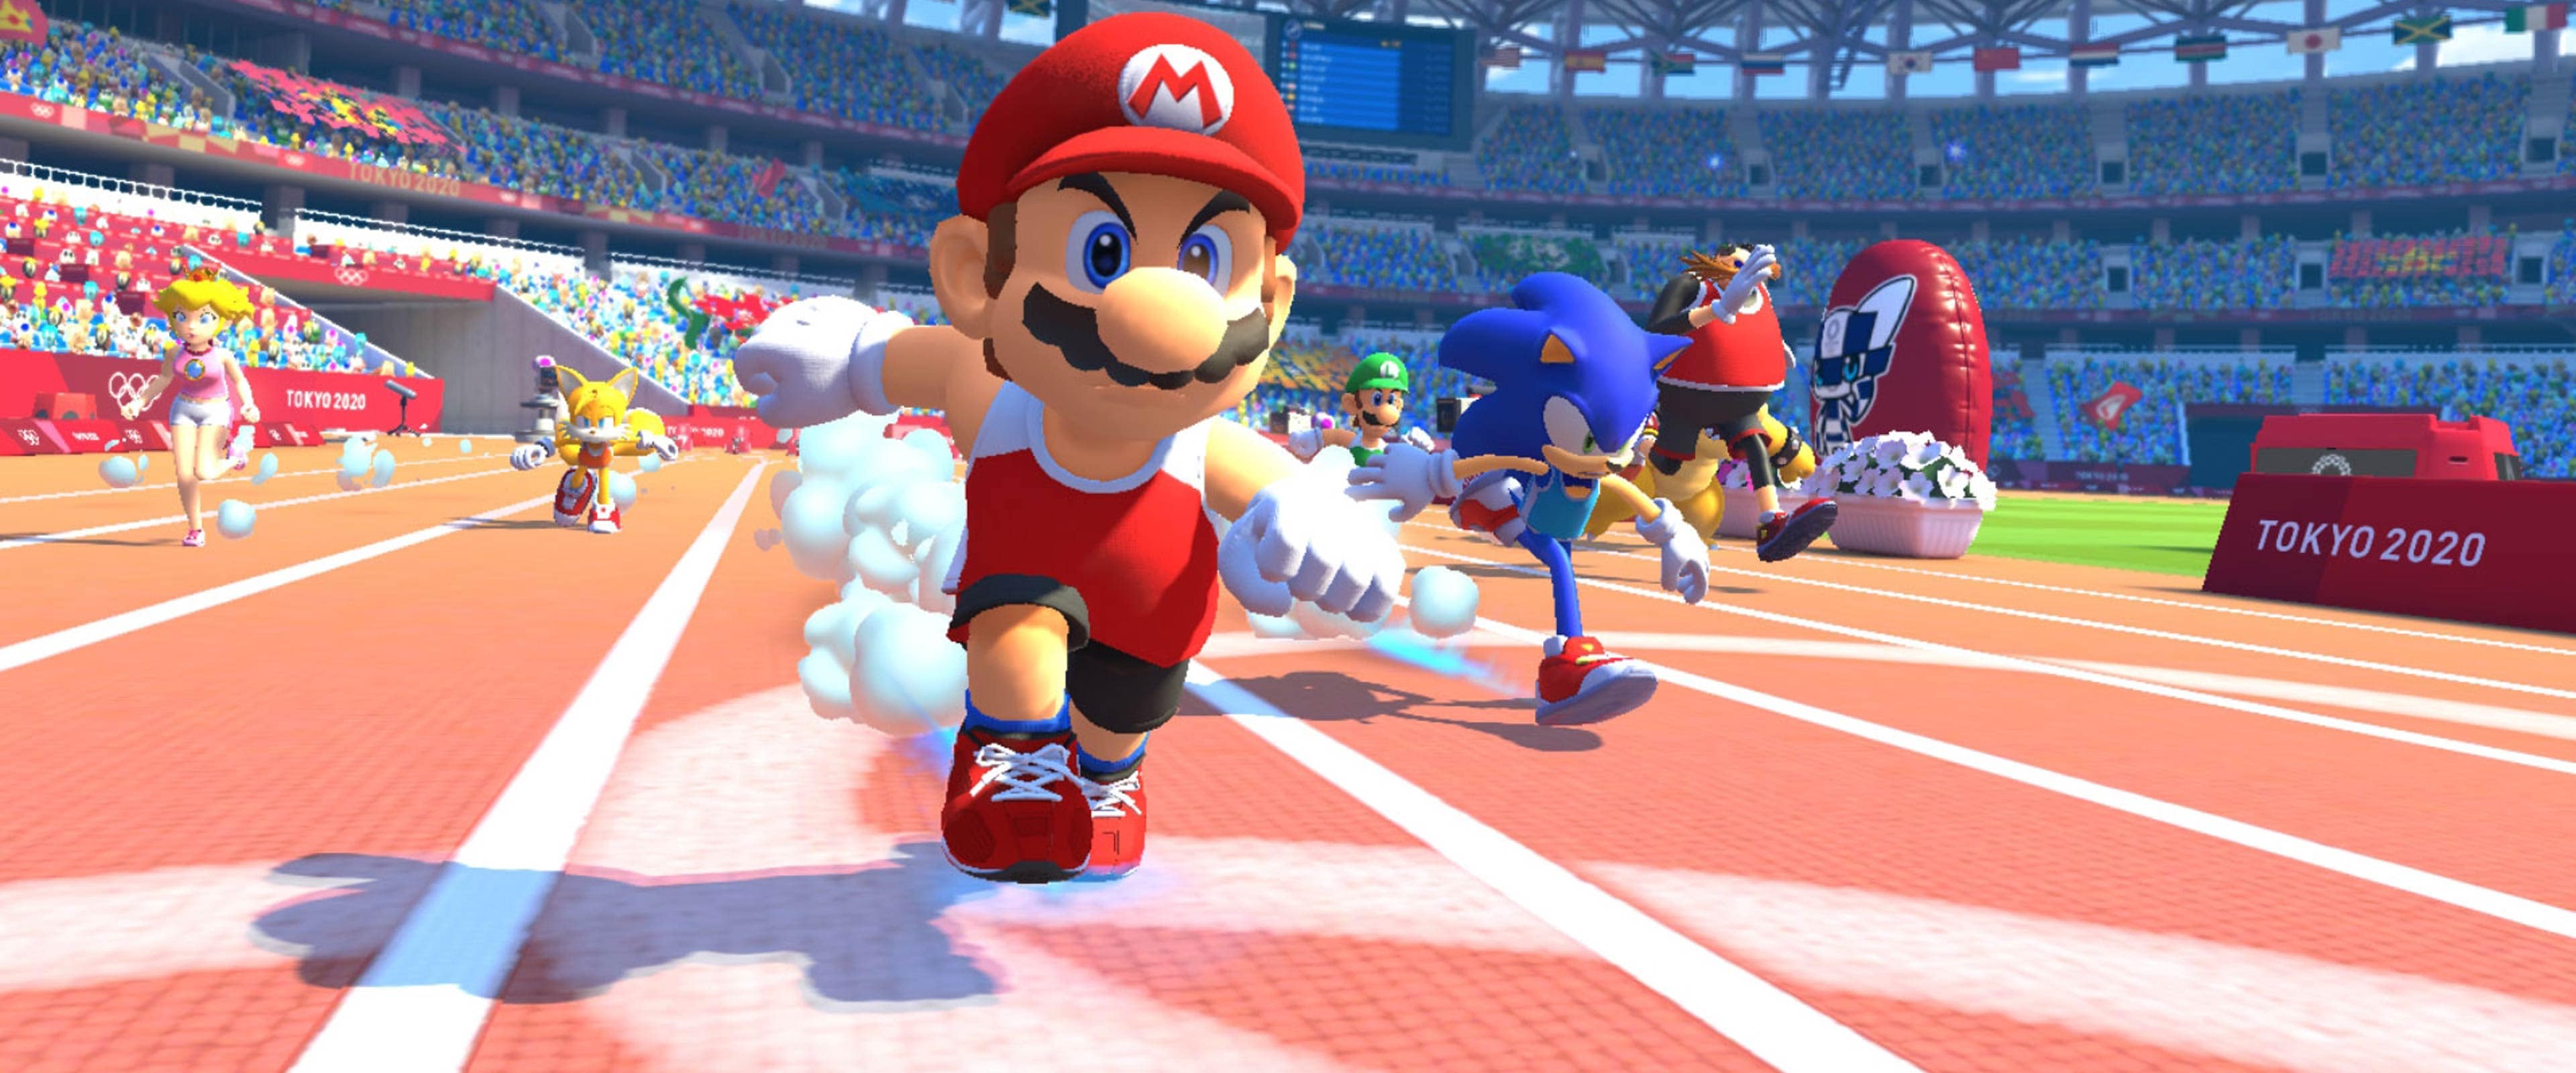 Mario and Sonic set for new Olympic adventure in Tokyo 2020 video game - Olympic News